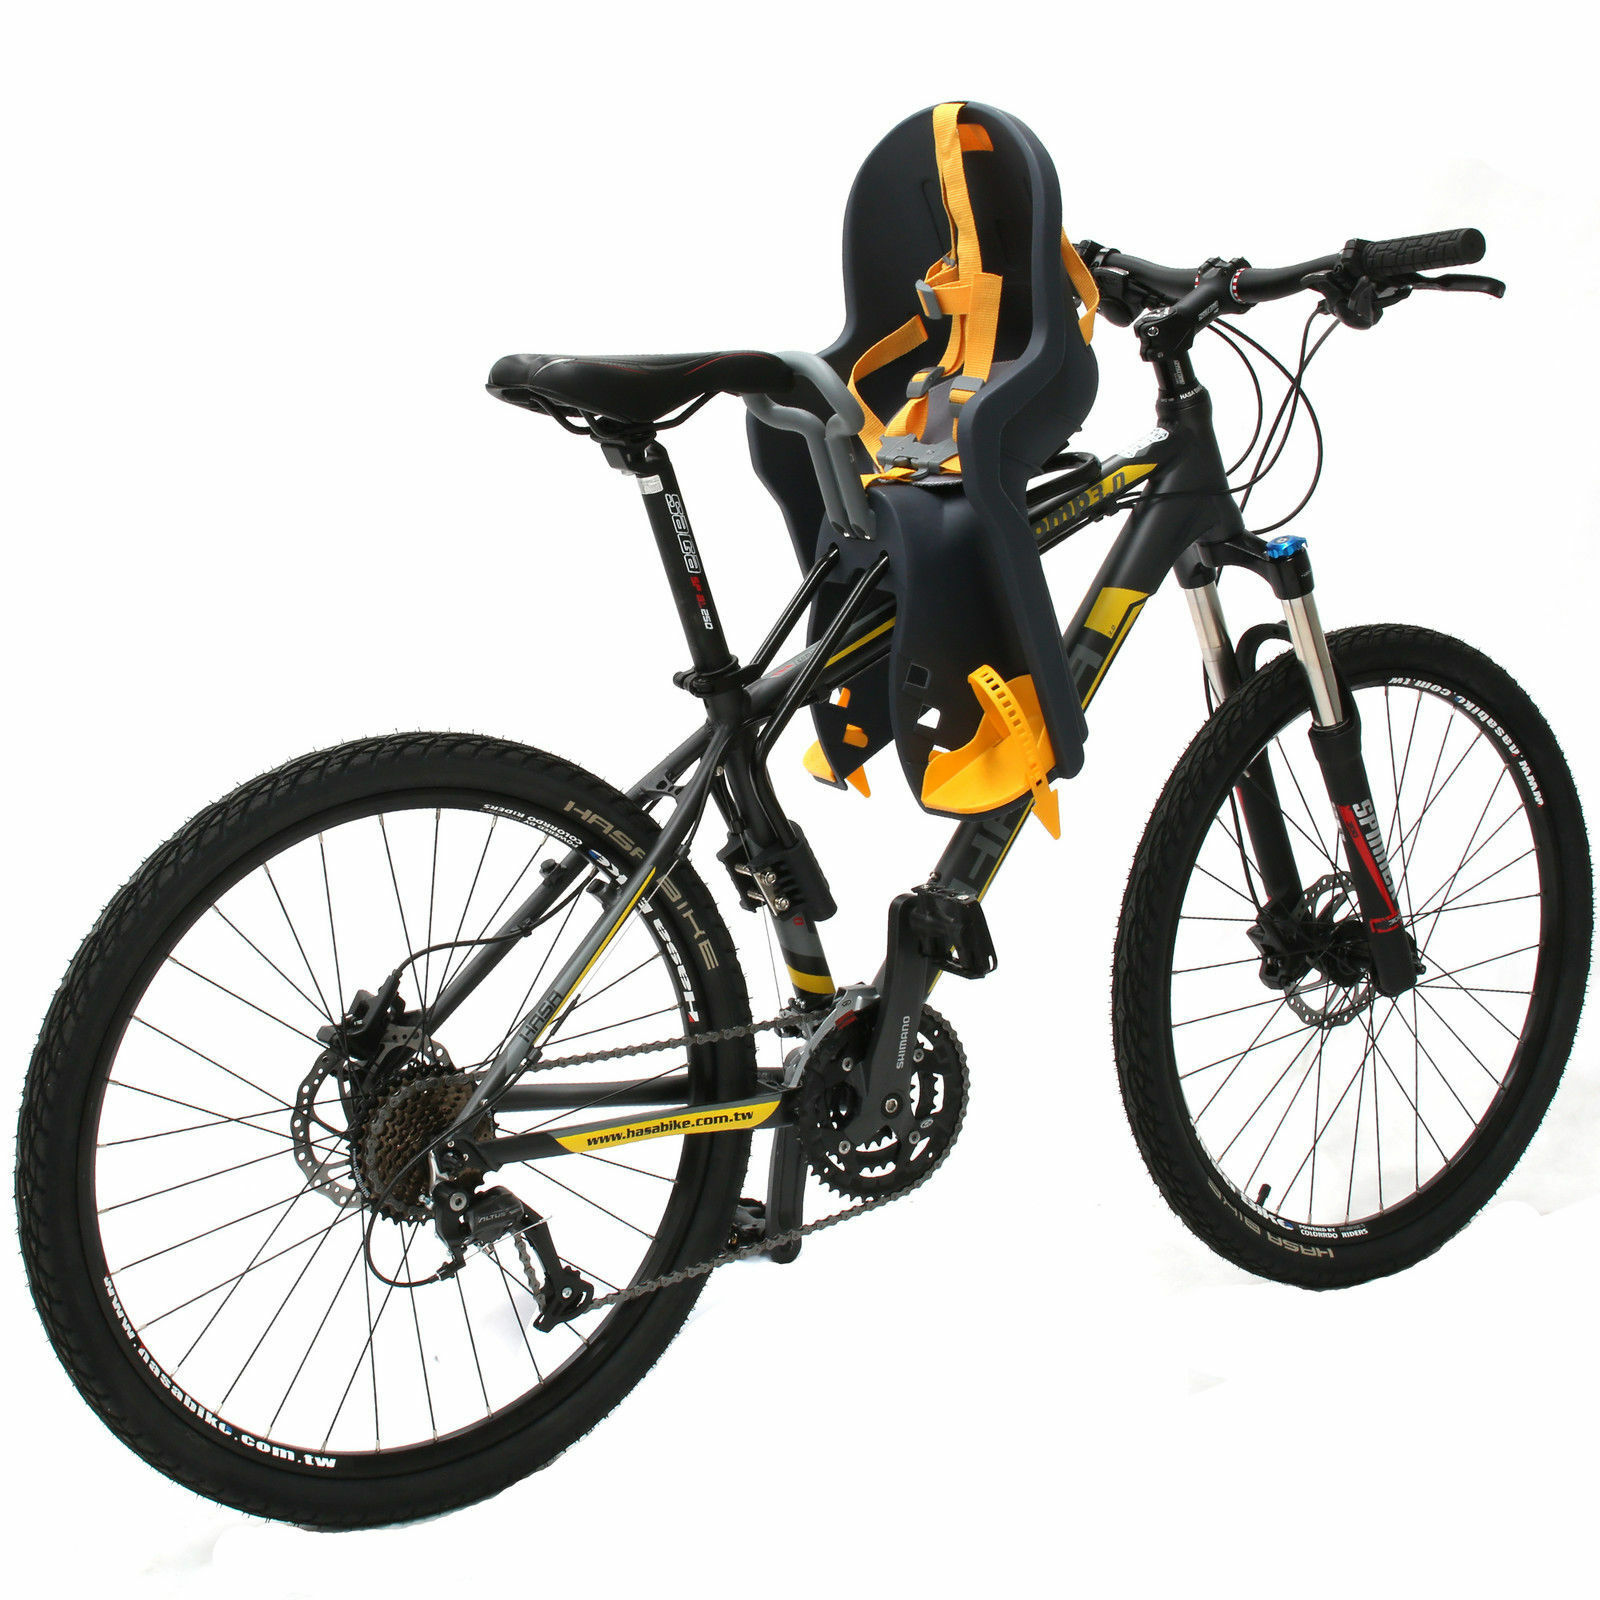 cyclingdeal bicycle kids child front baby seat bike carrier usa standard with ha